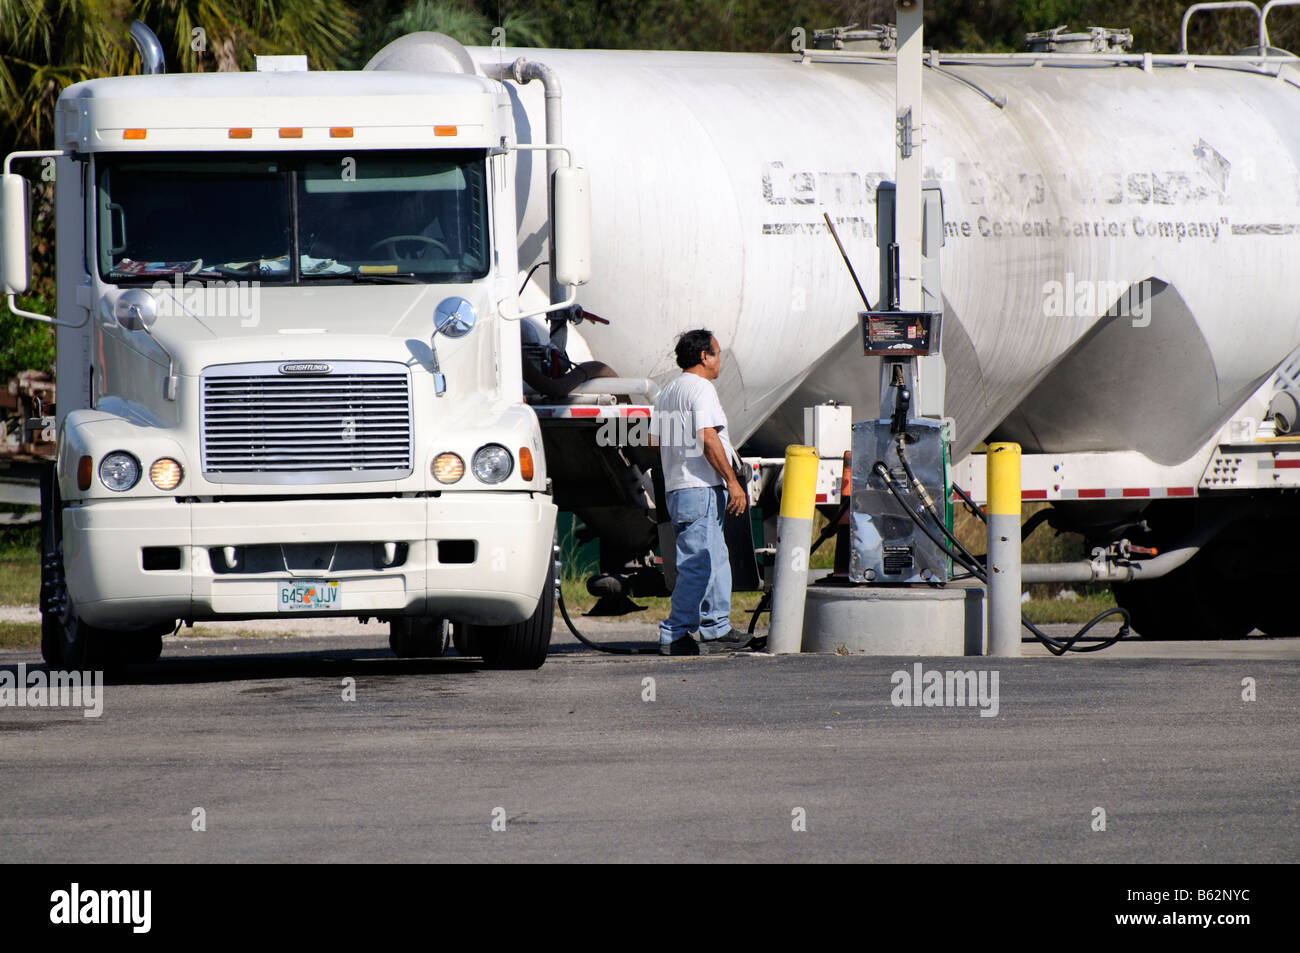 Freightliner truck refuelling at an American gas station Florida USA Stock Photo